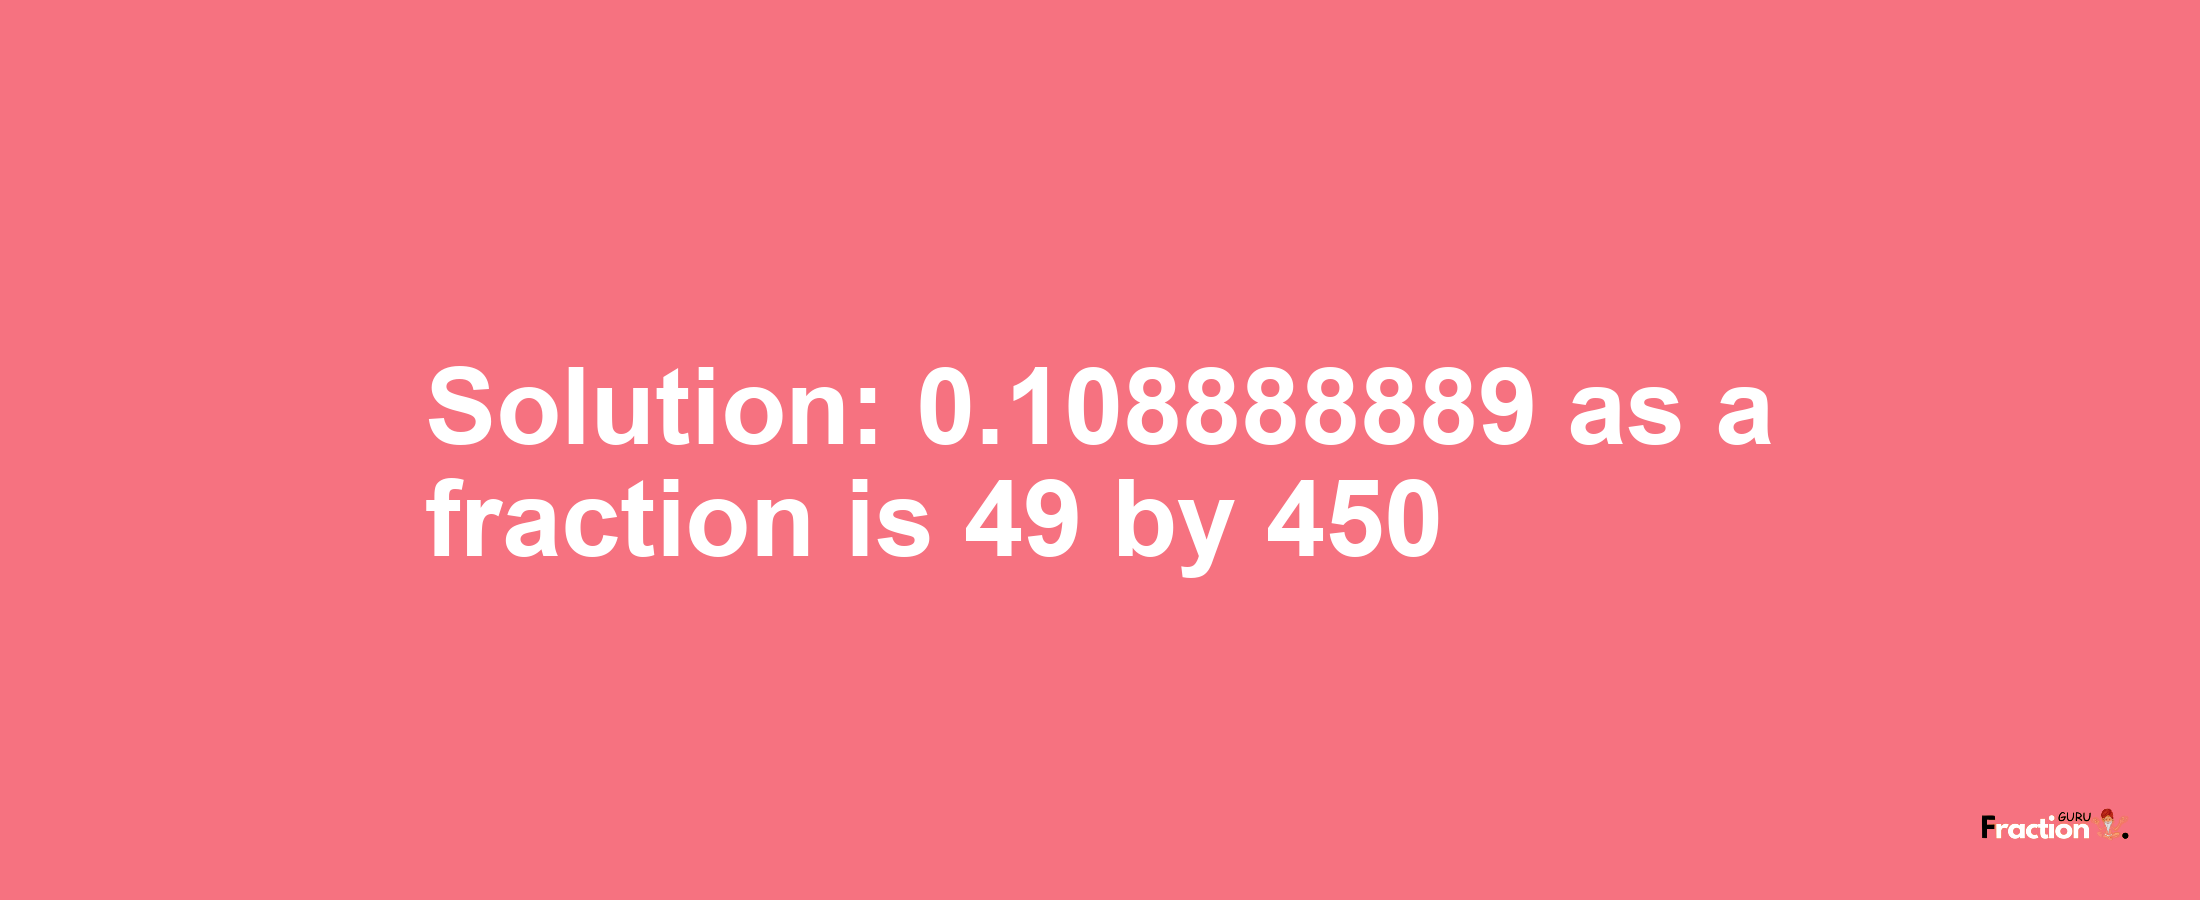 Solution:0.108888889 as a fraction is 49/450